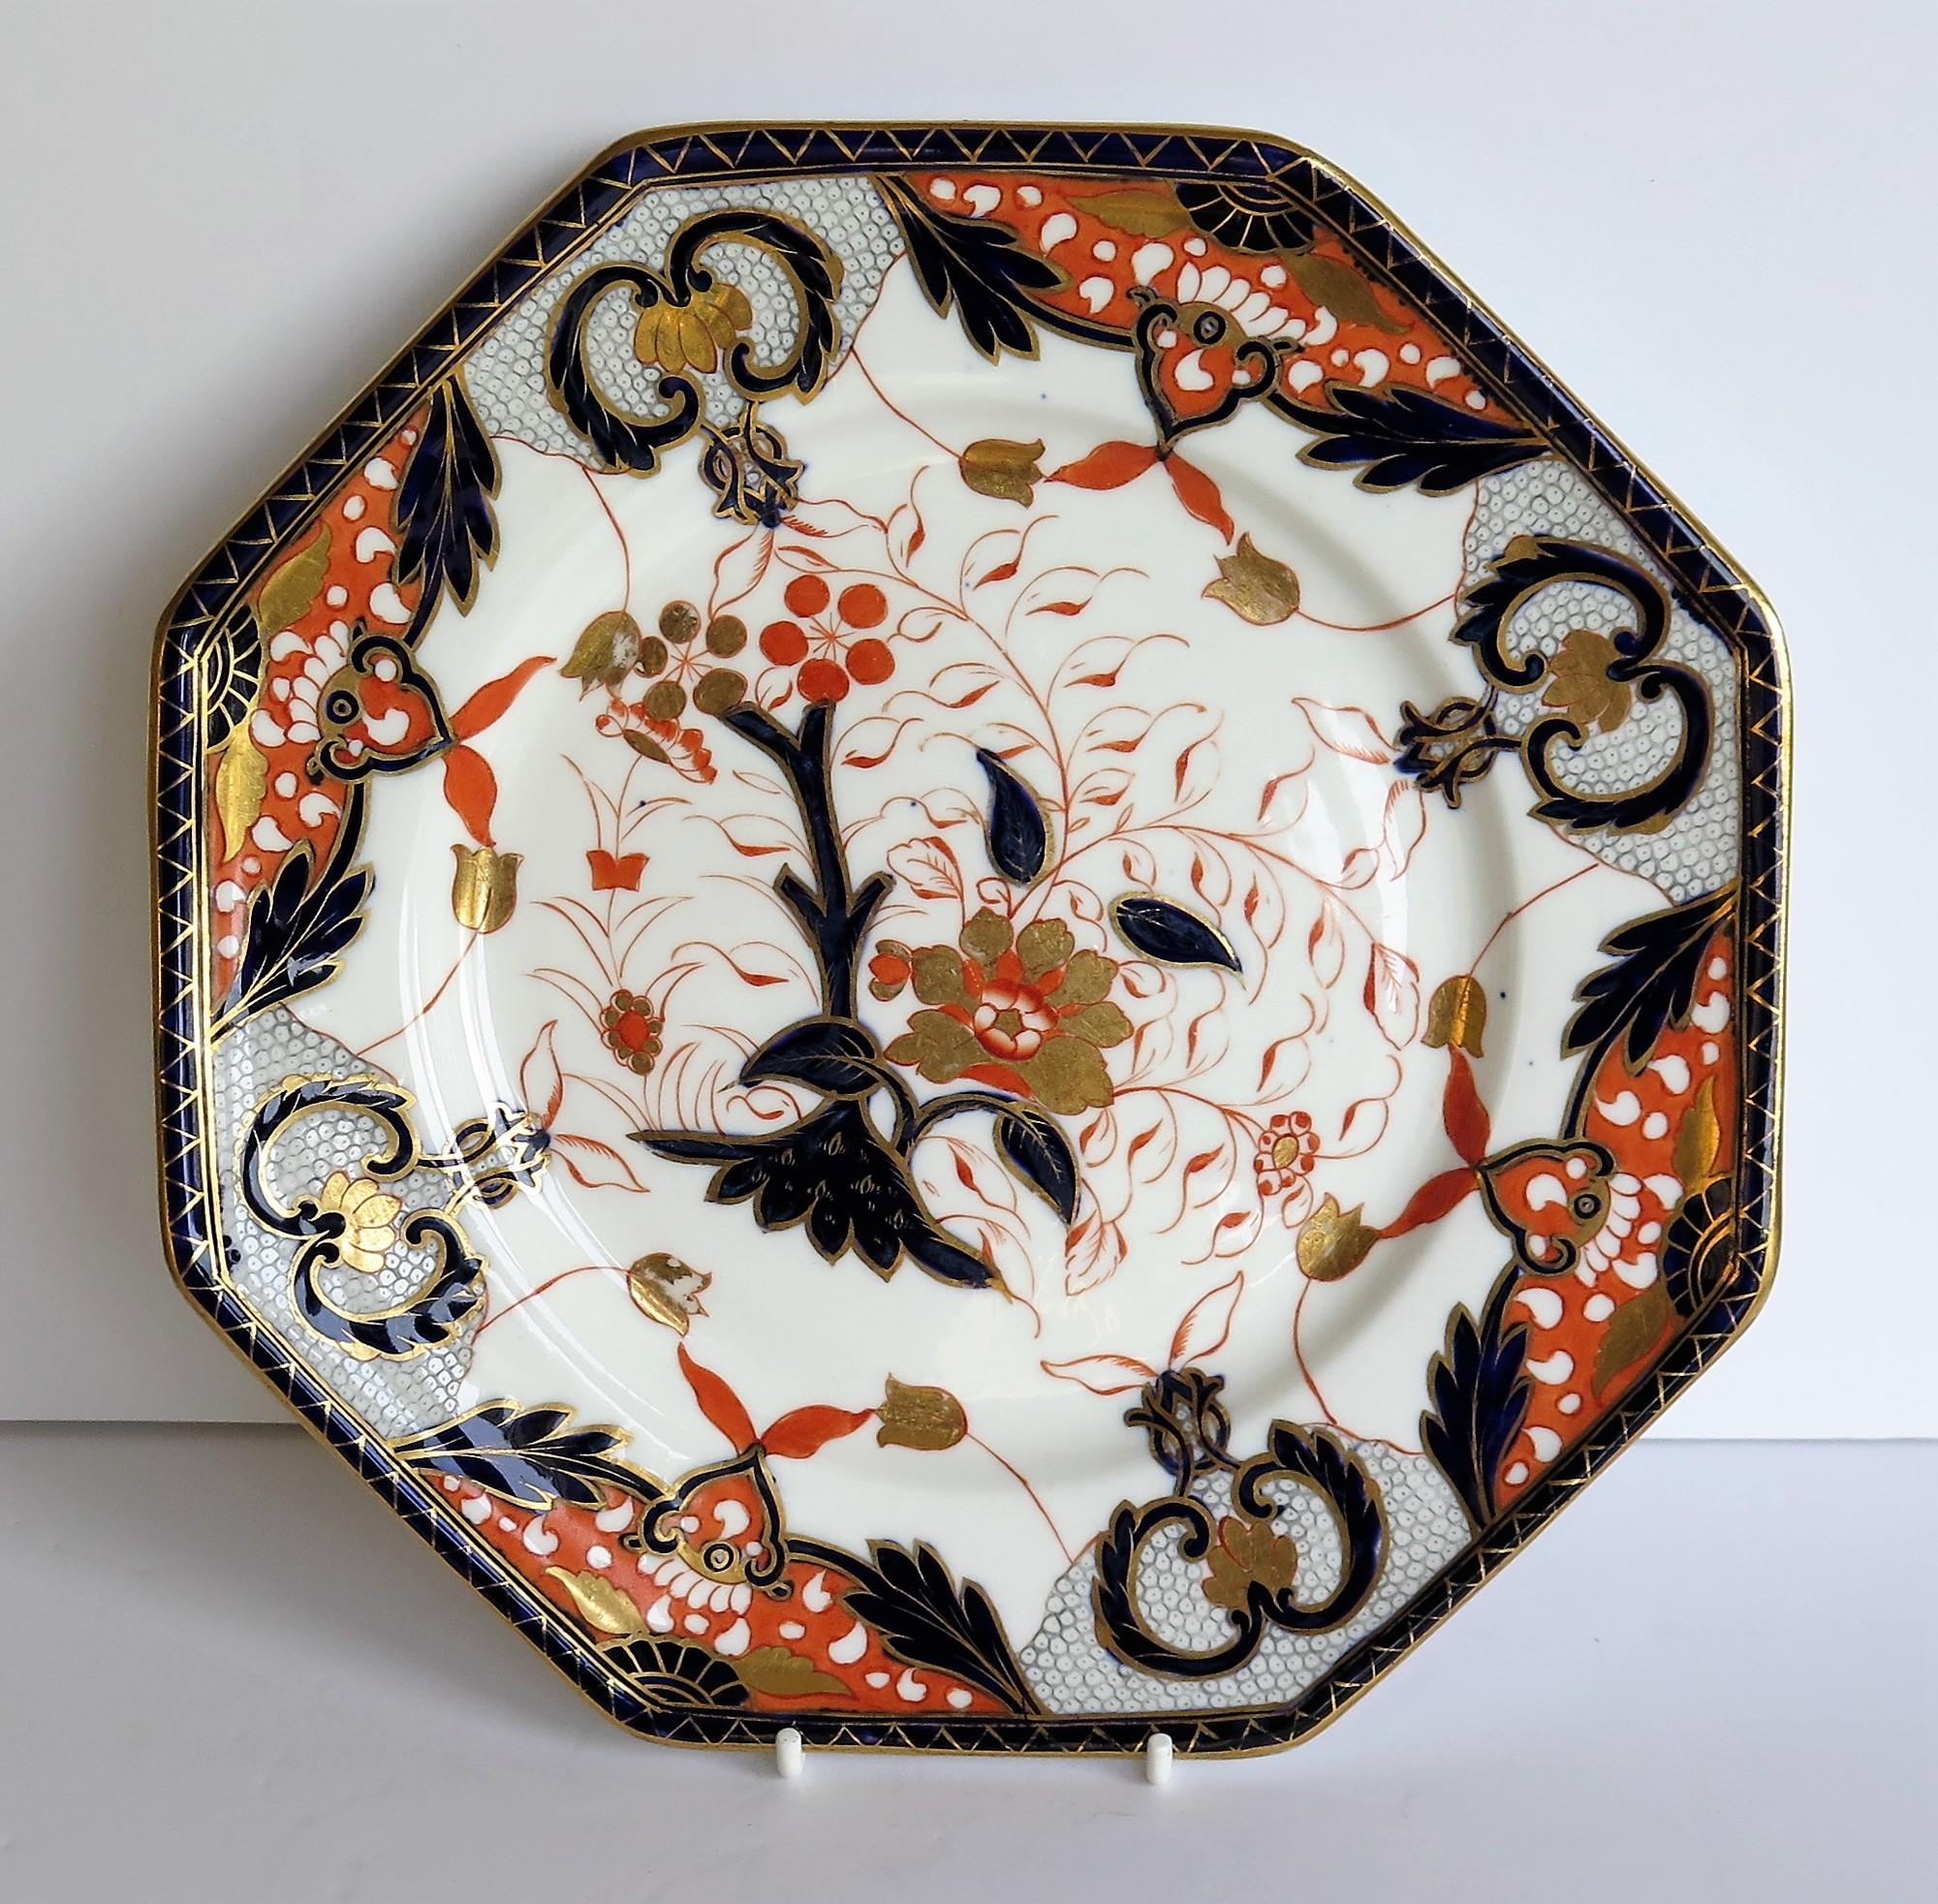 This is a striking porcelain octagonal plate, hand painted and gilded, from the Davenport Company of Longport, Staffordshire Potteries, England, dating to the 19th century, Victorian period, circa 1875.

The Plate has an octagonal form and is